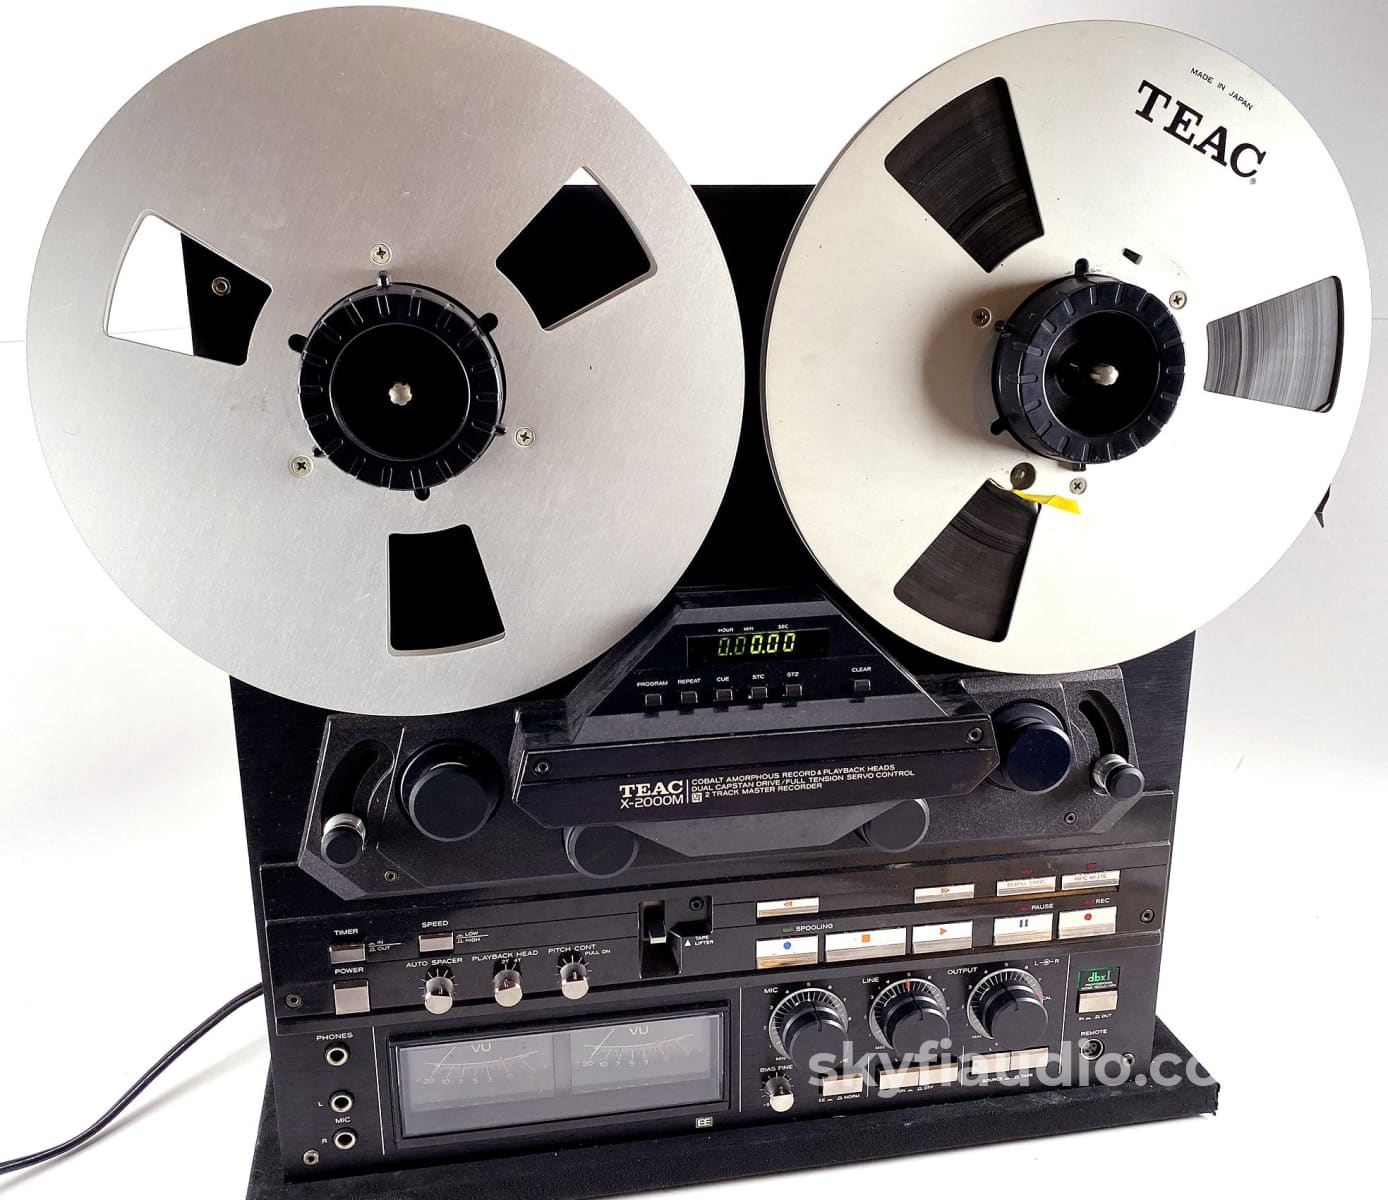 Teac X-2000 R reel to reel as seen in Pulp Fiction - Film and Furniture